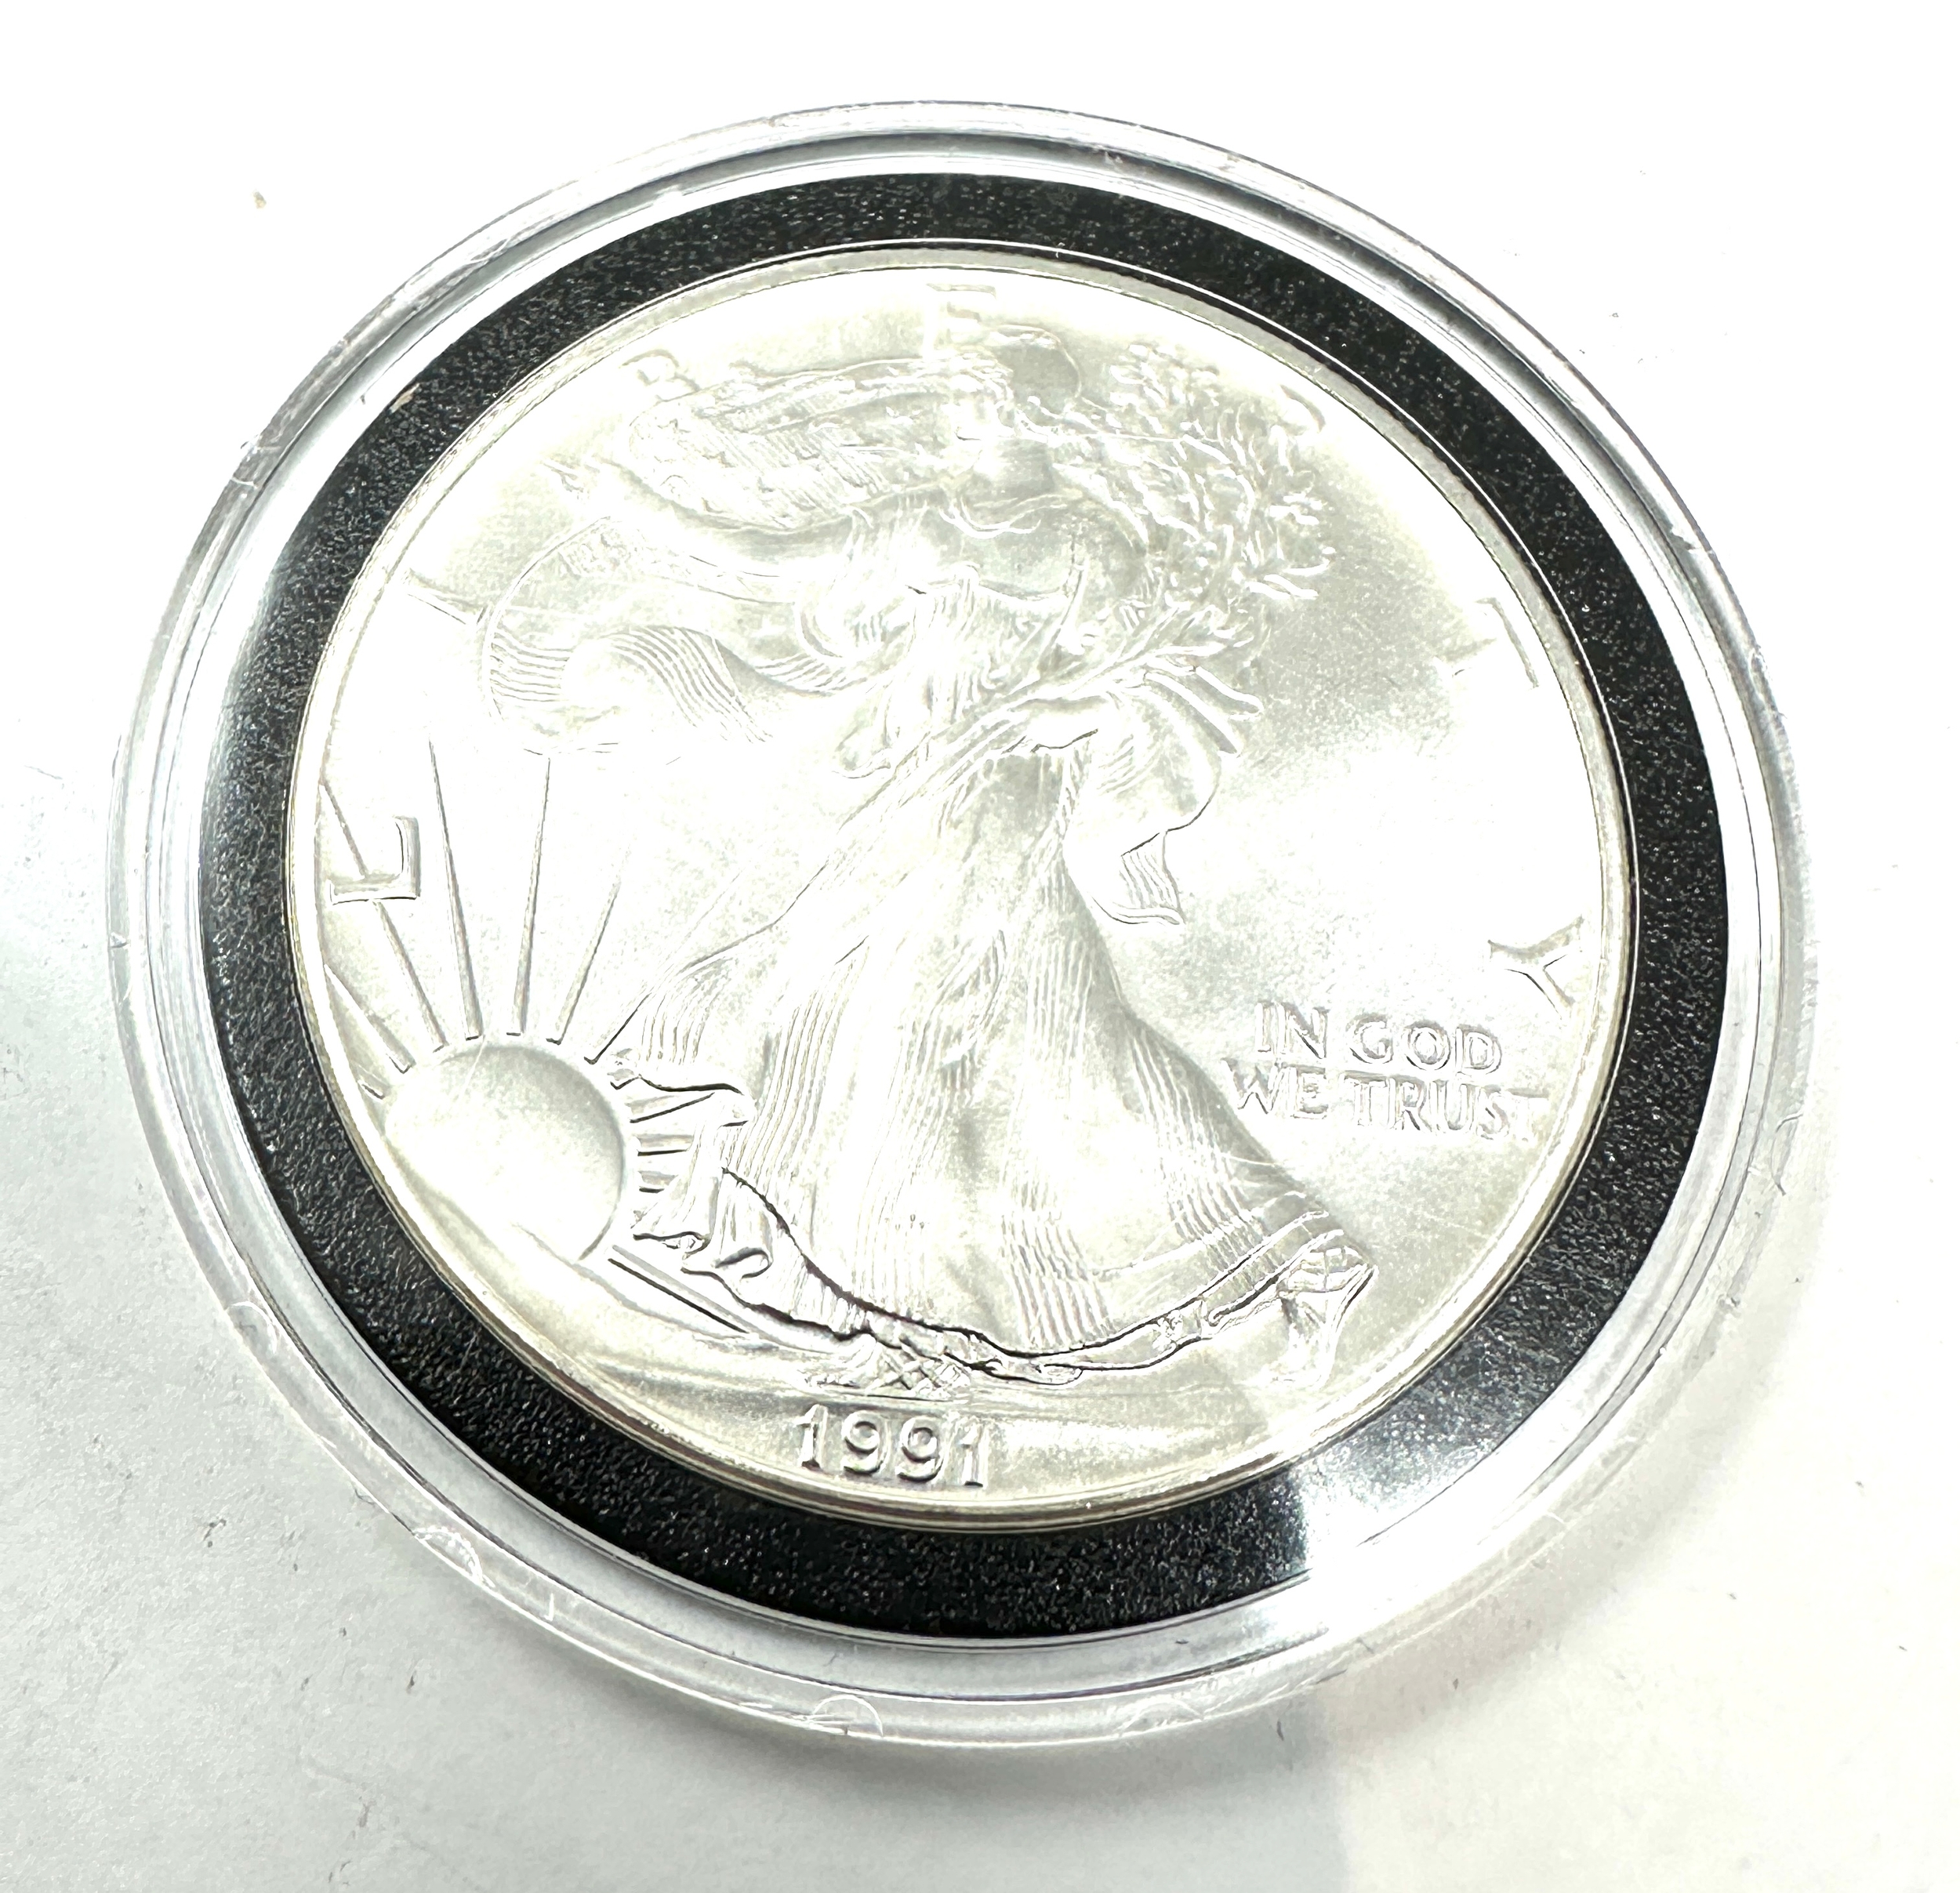 1991 American 1oz Fine Silver Liberty Eagle $1 One Dollar Coin in original sealed case - Image 2 of 2